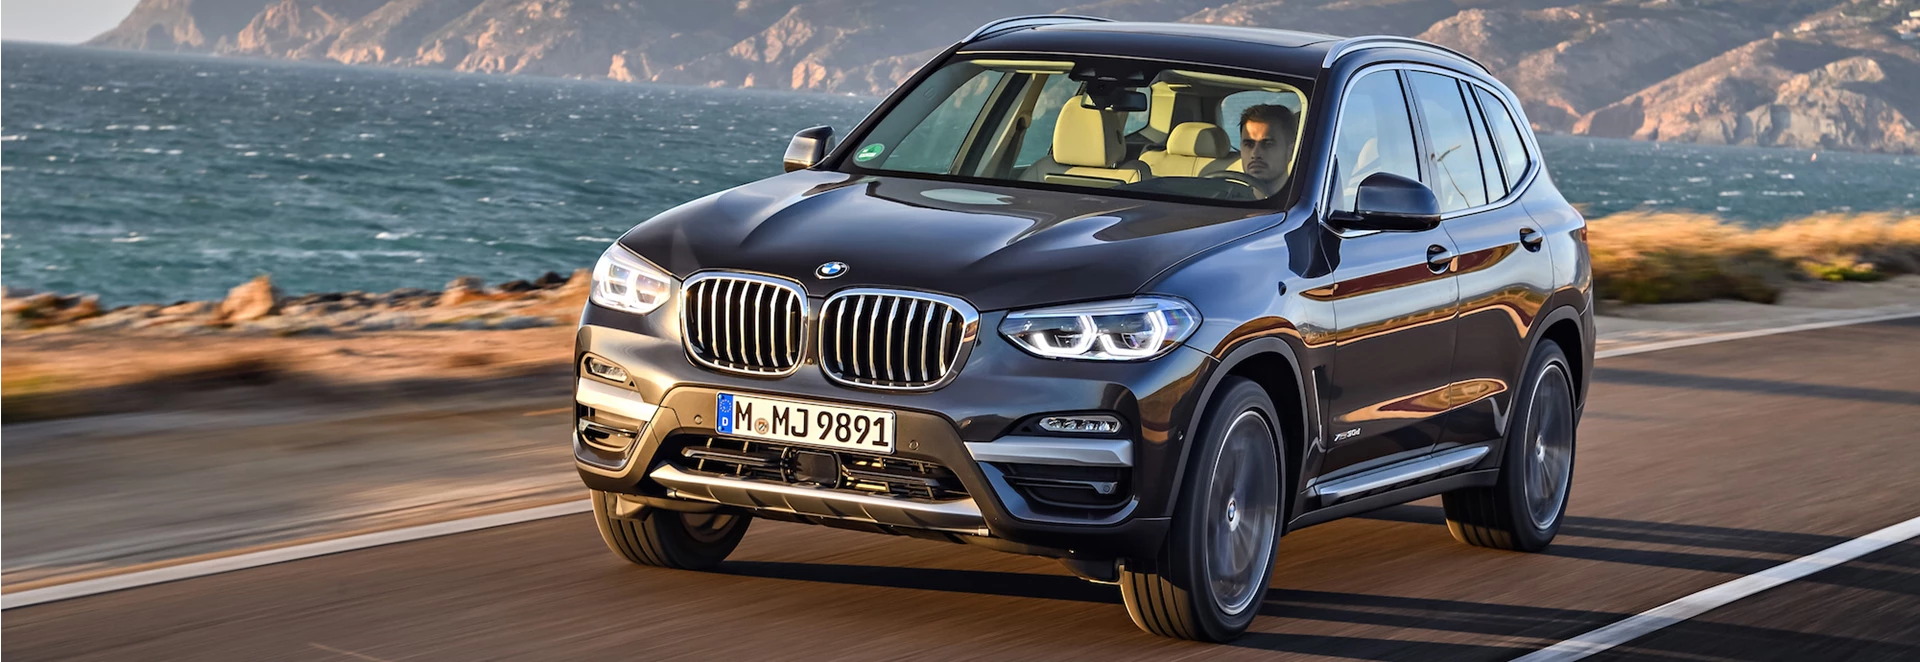 2018 BMW X3 Review 